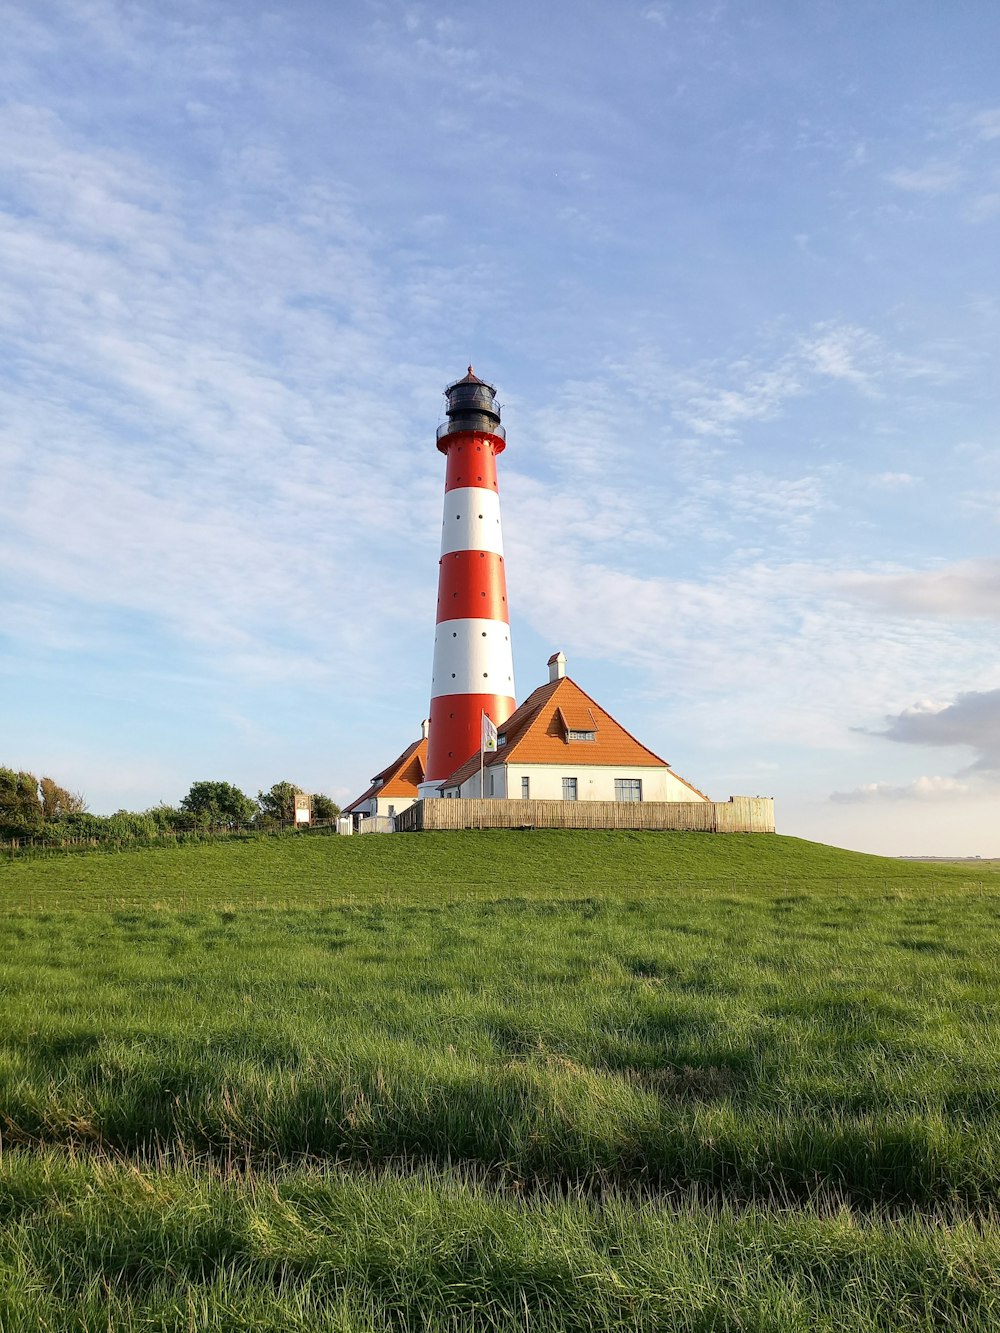 a red and white lighthouse on a grassy hill